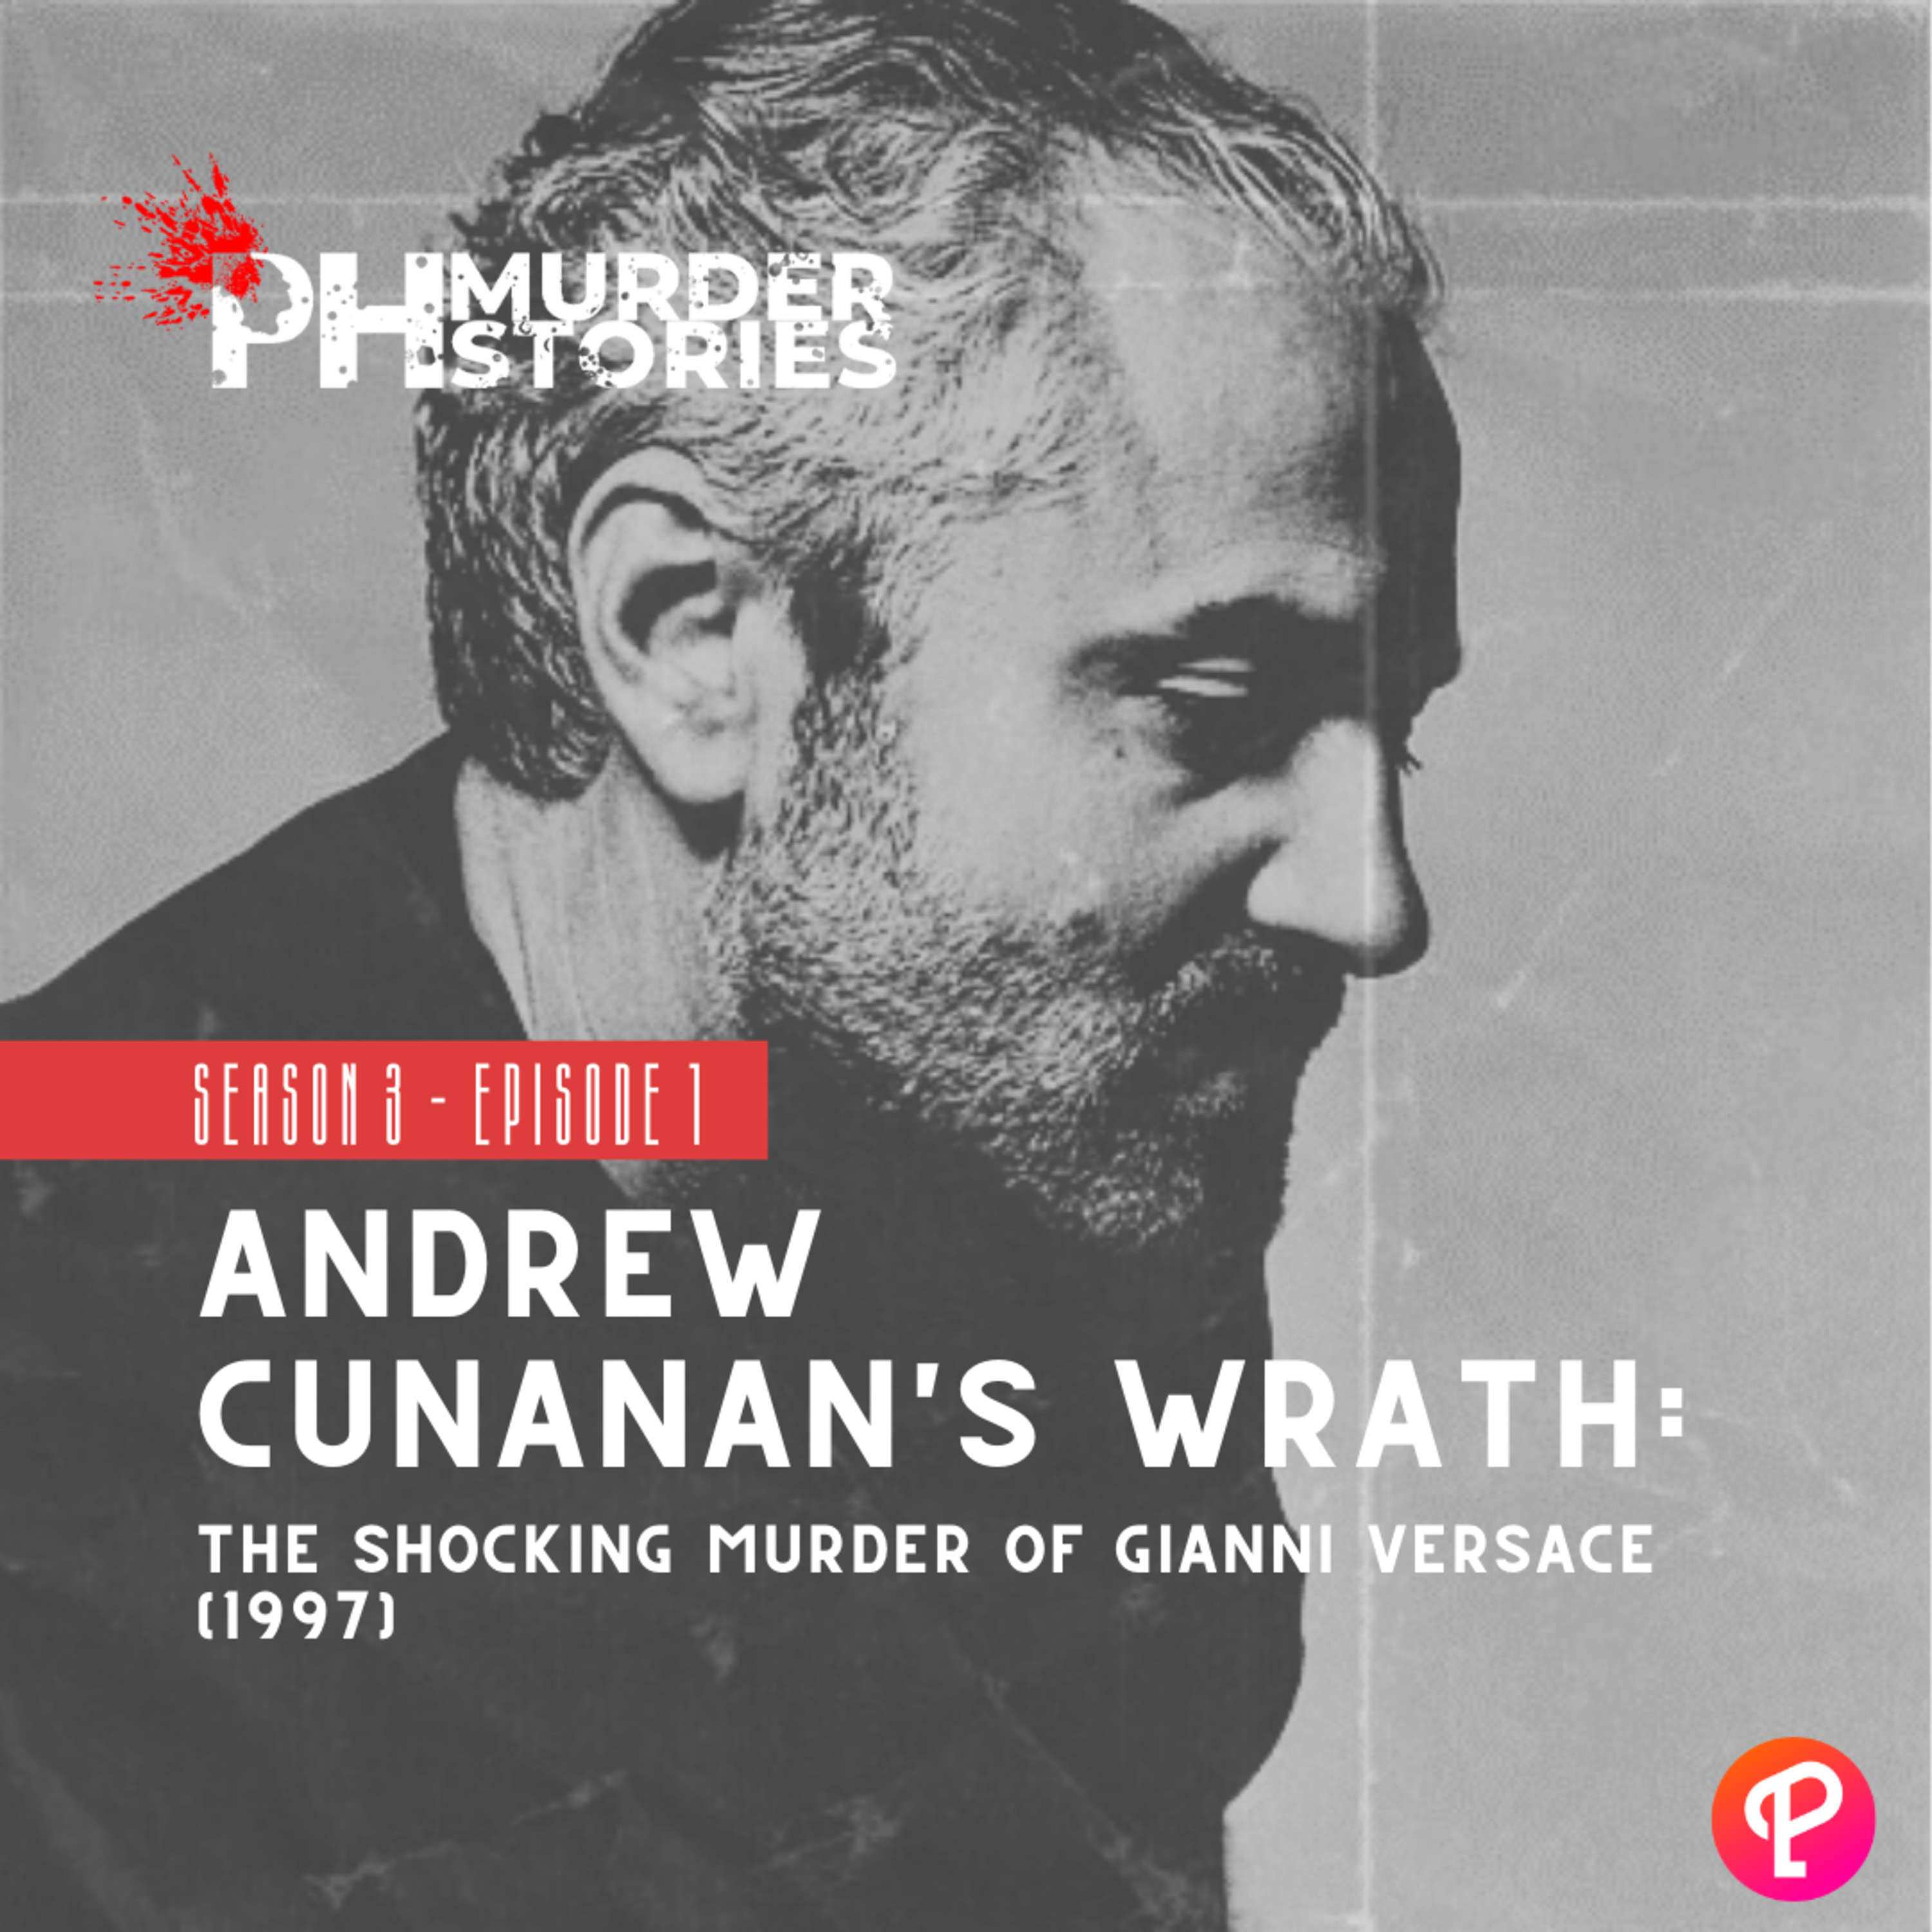 Andrew Cunanan's Wrath: The Shocking Murder of Gianni Versace (1997)